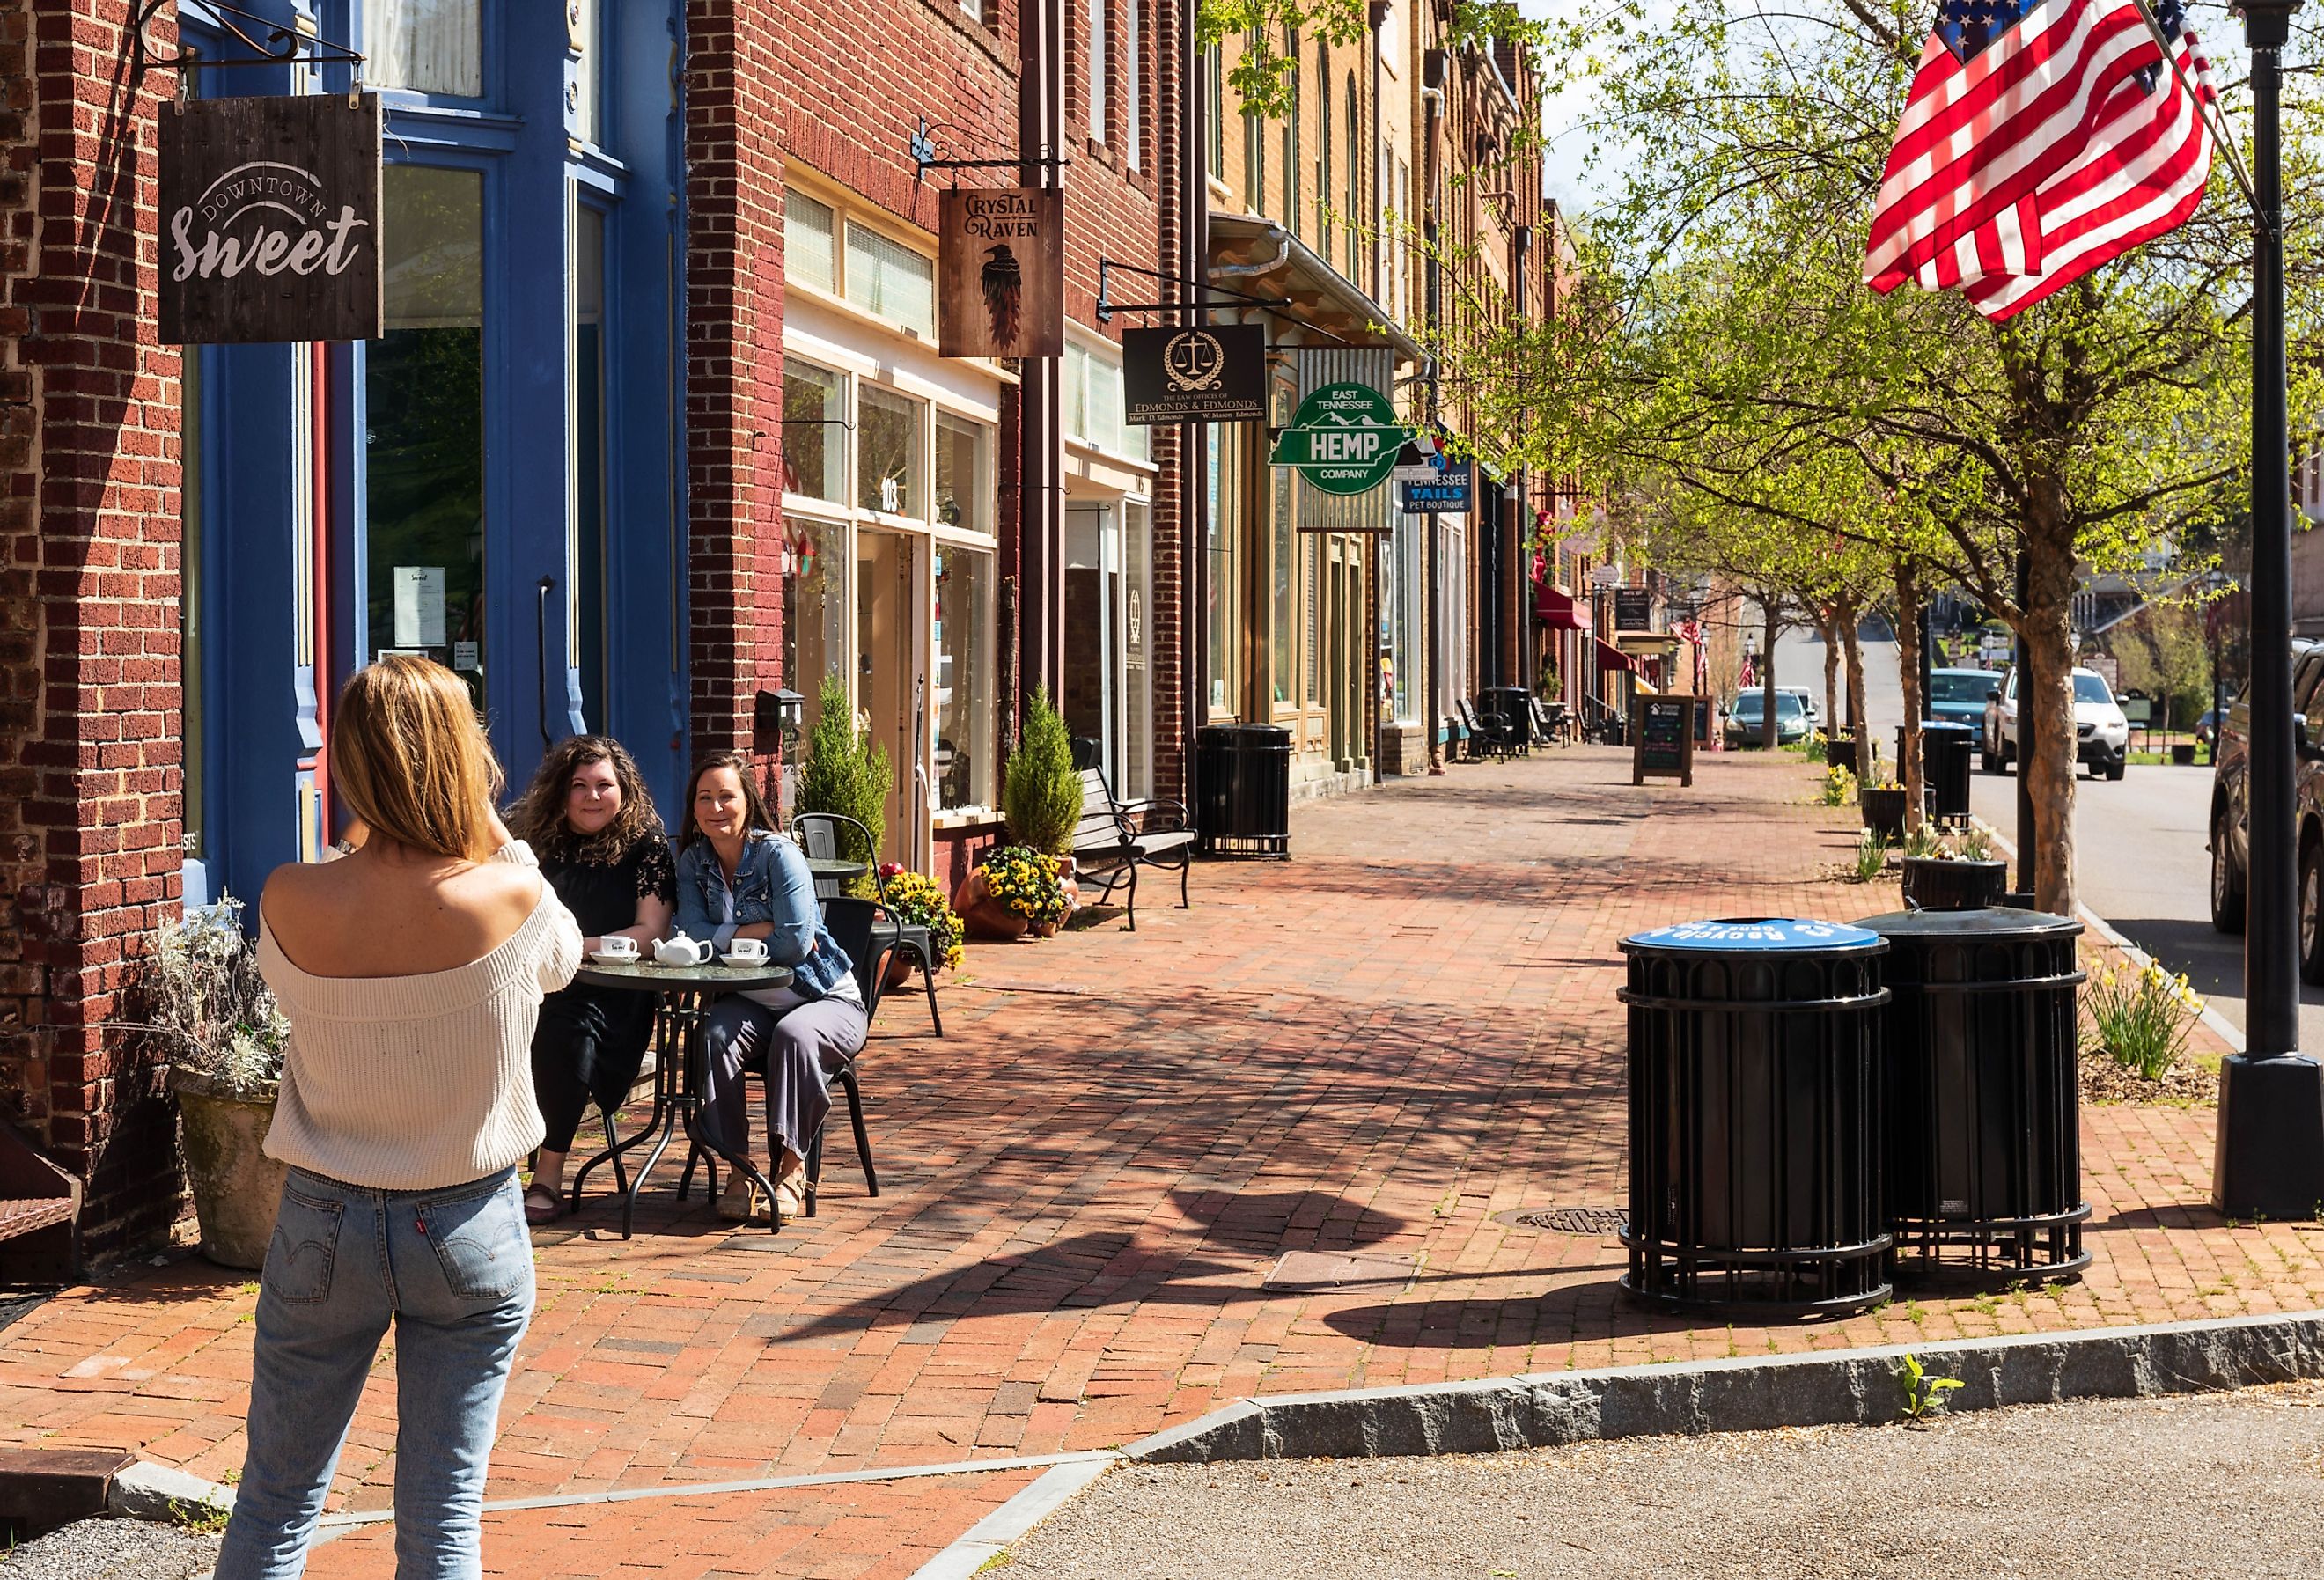 Woman with back to camera takes a picture of two friends seated at a sidewalk table, in front of the 'Downtown Sweet' coffee shop in historic Jonesborough, TN. Image credit Nolichuckyjake via Shutterstock.